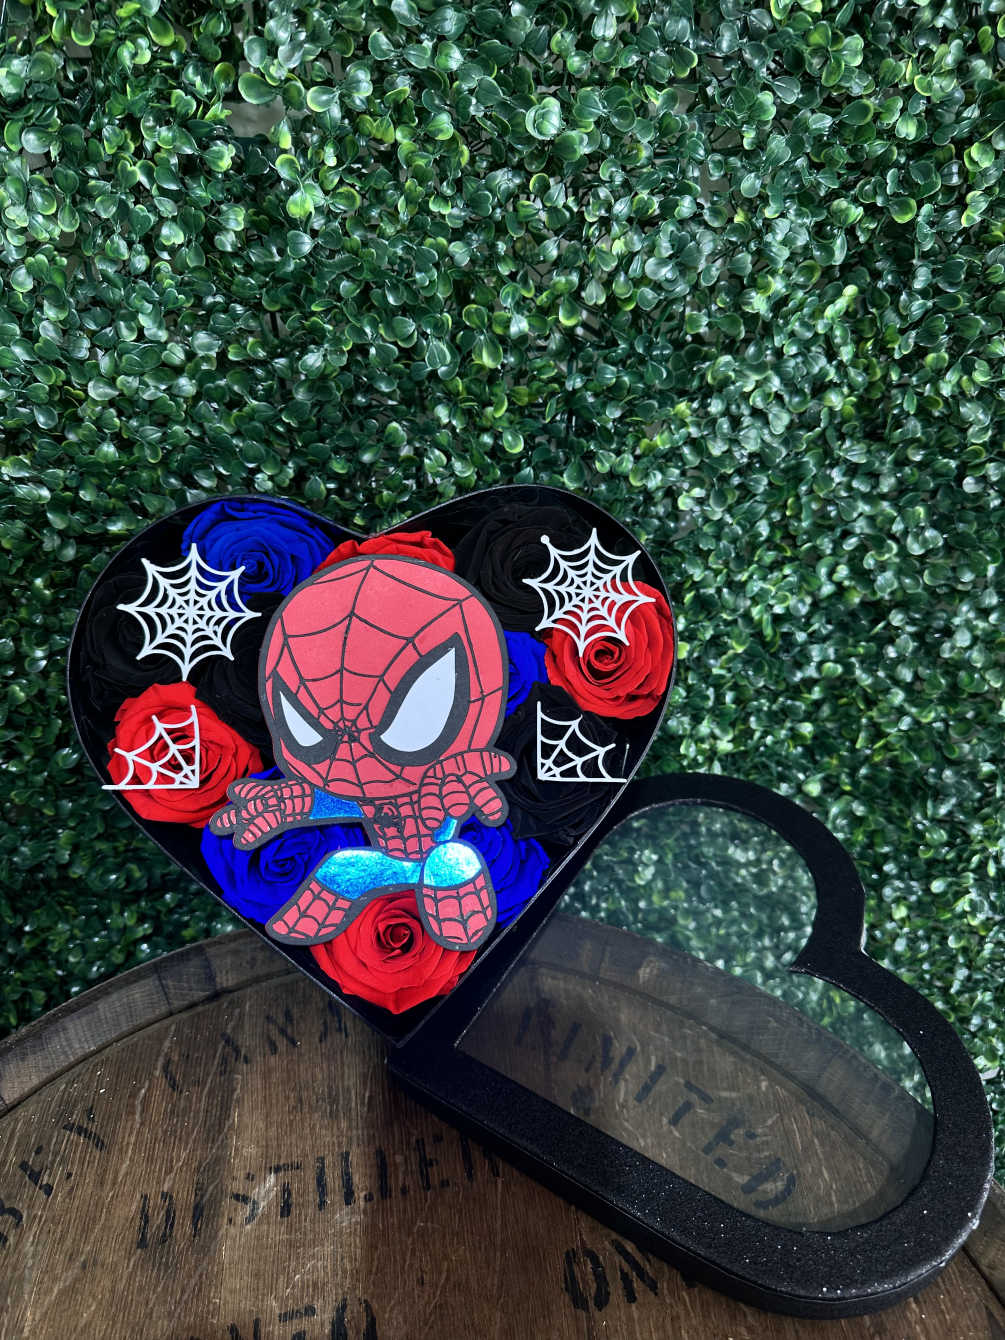 The perfect gift for a Spiderman Lover! It contains 11 preserved Roses